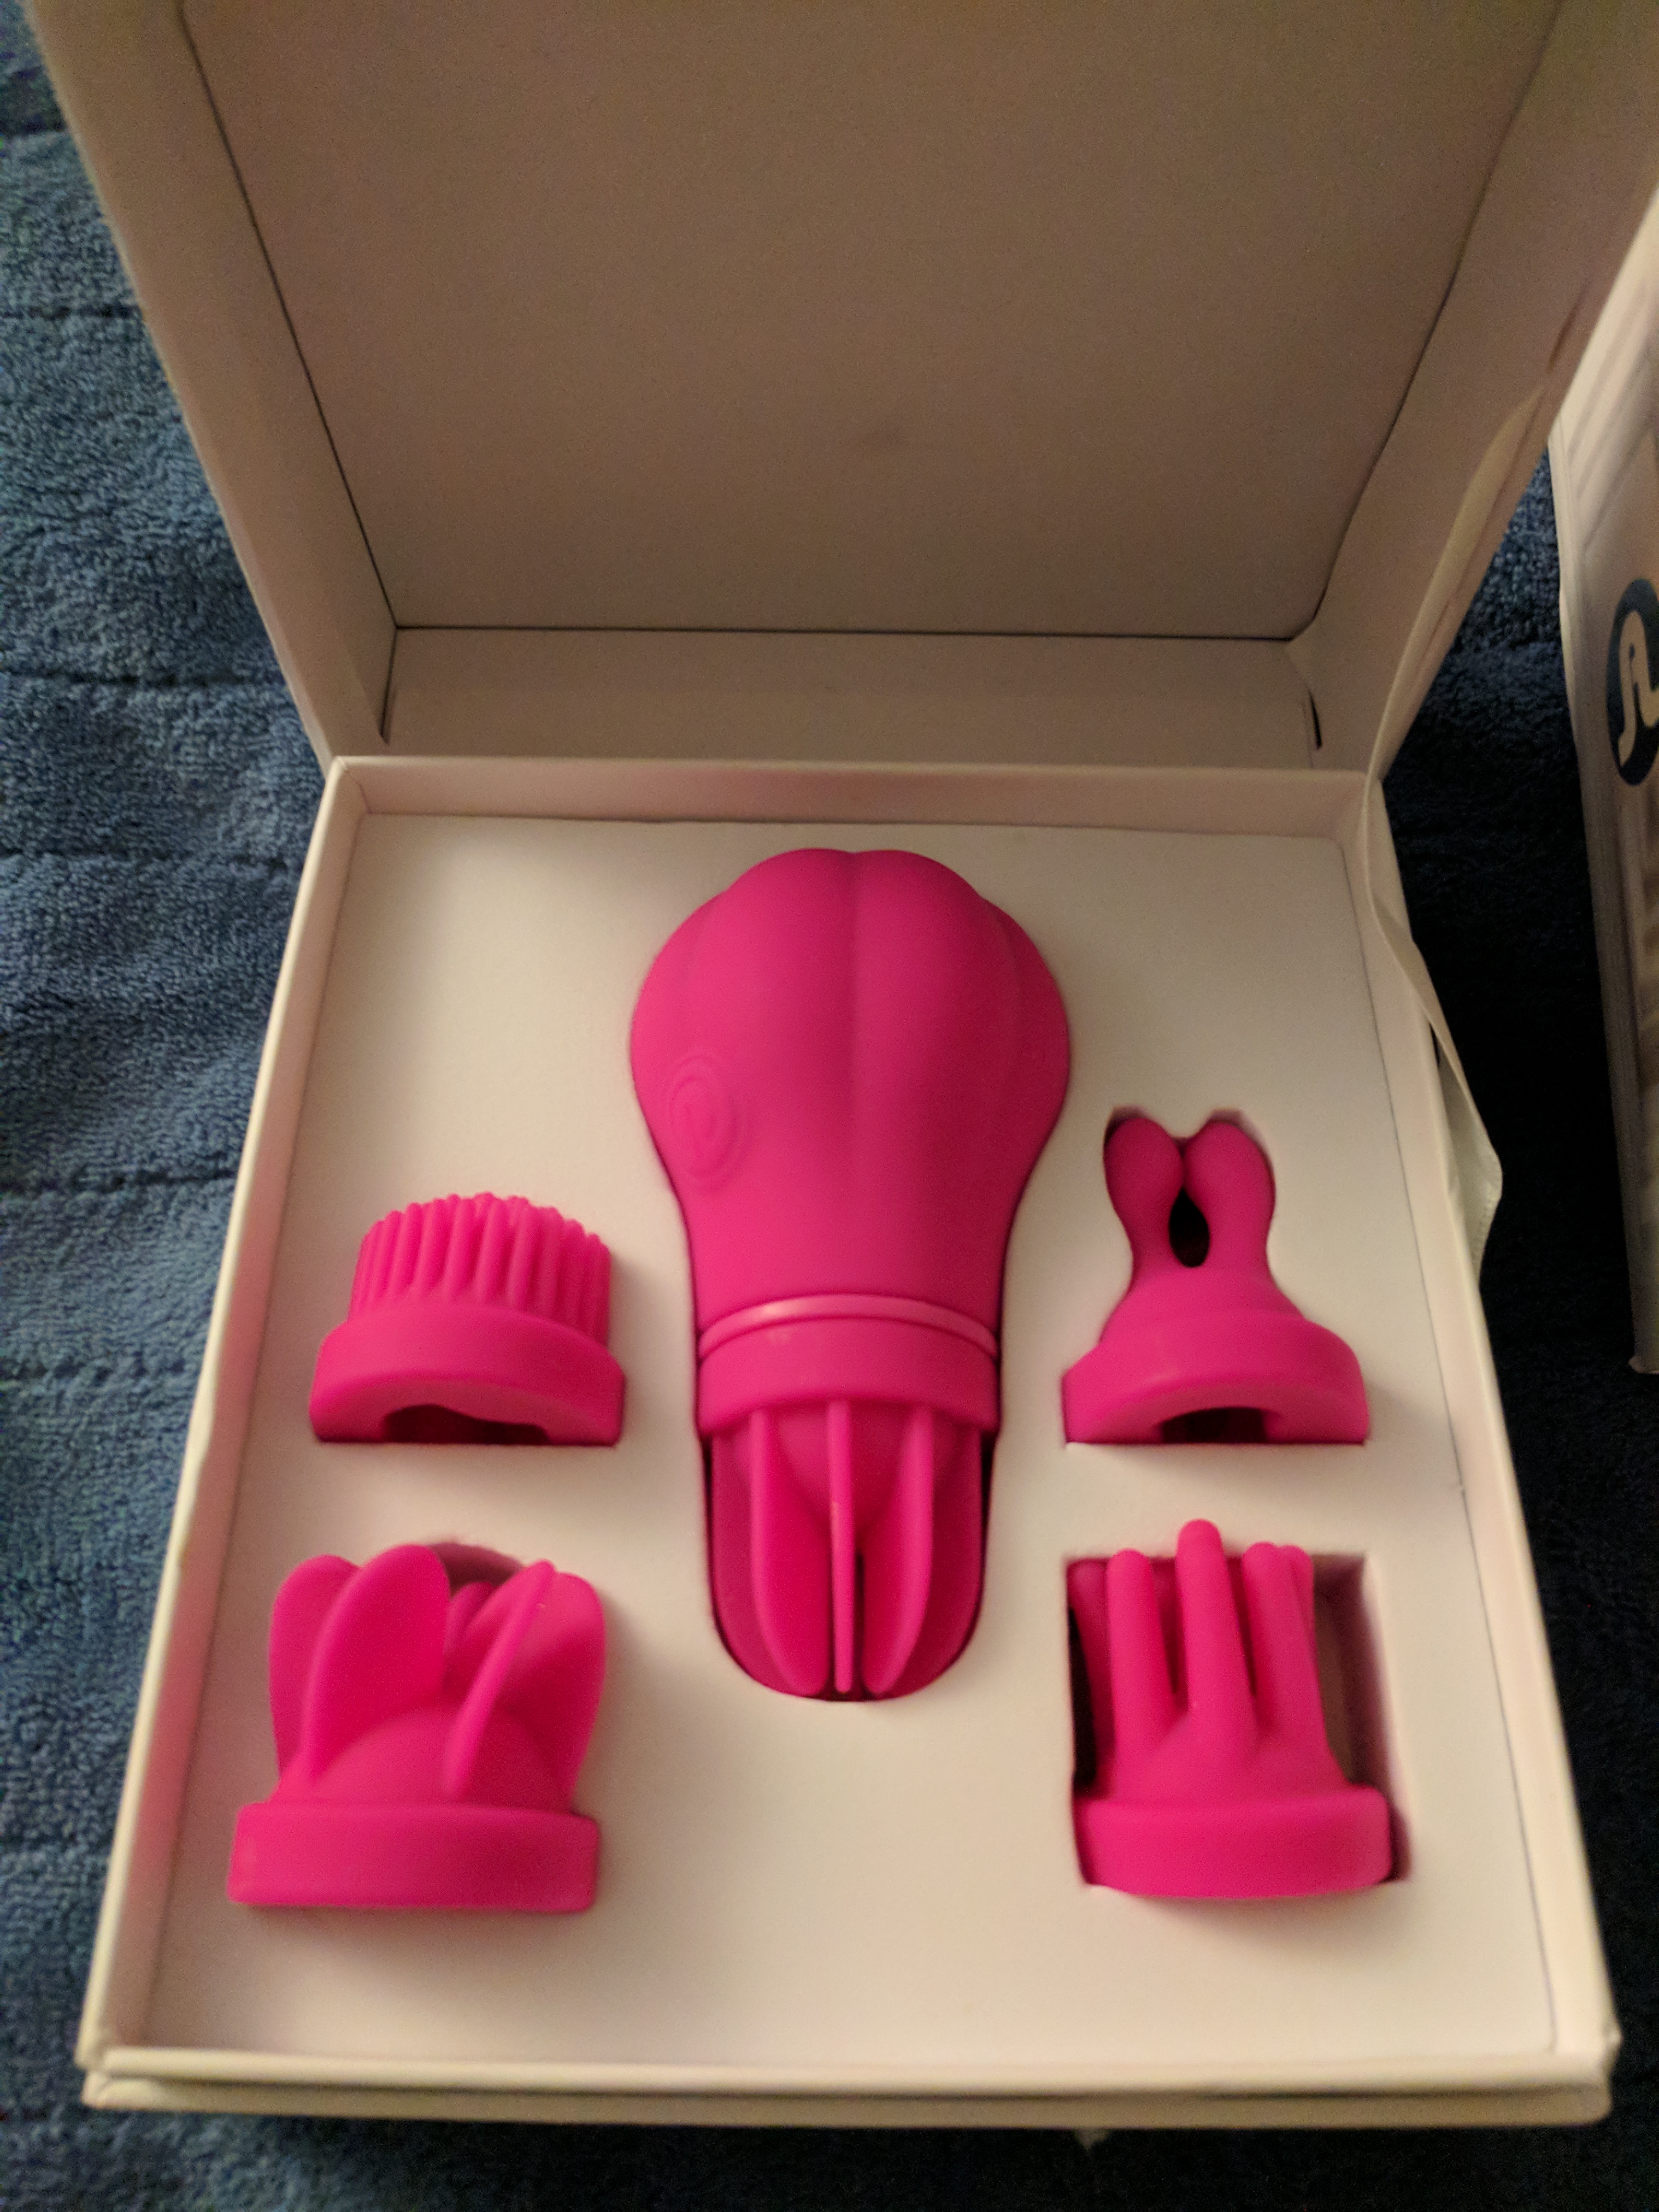 Inside the Caress box, showing the toy and all five attachment heads